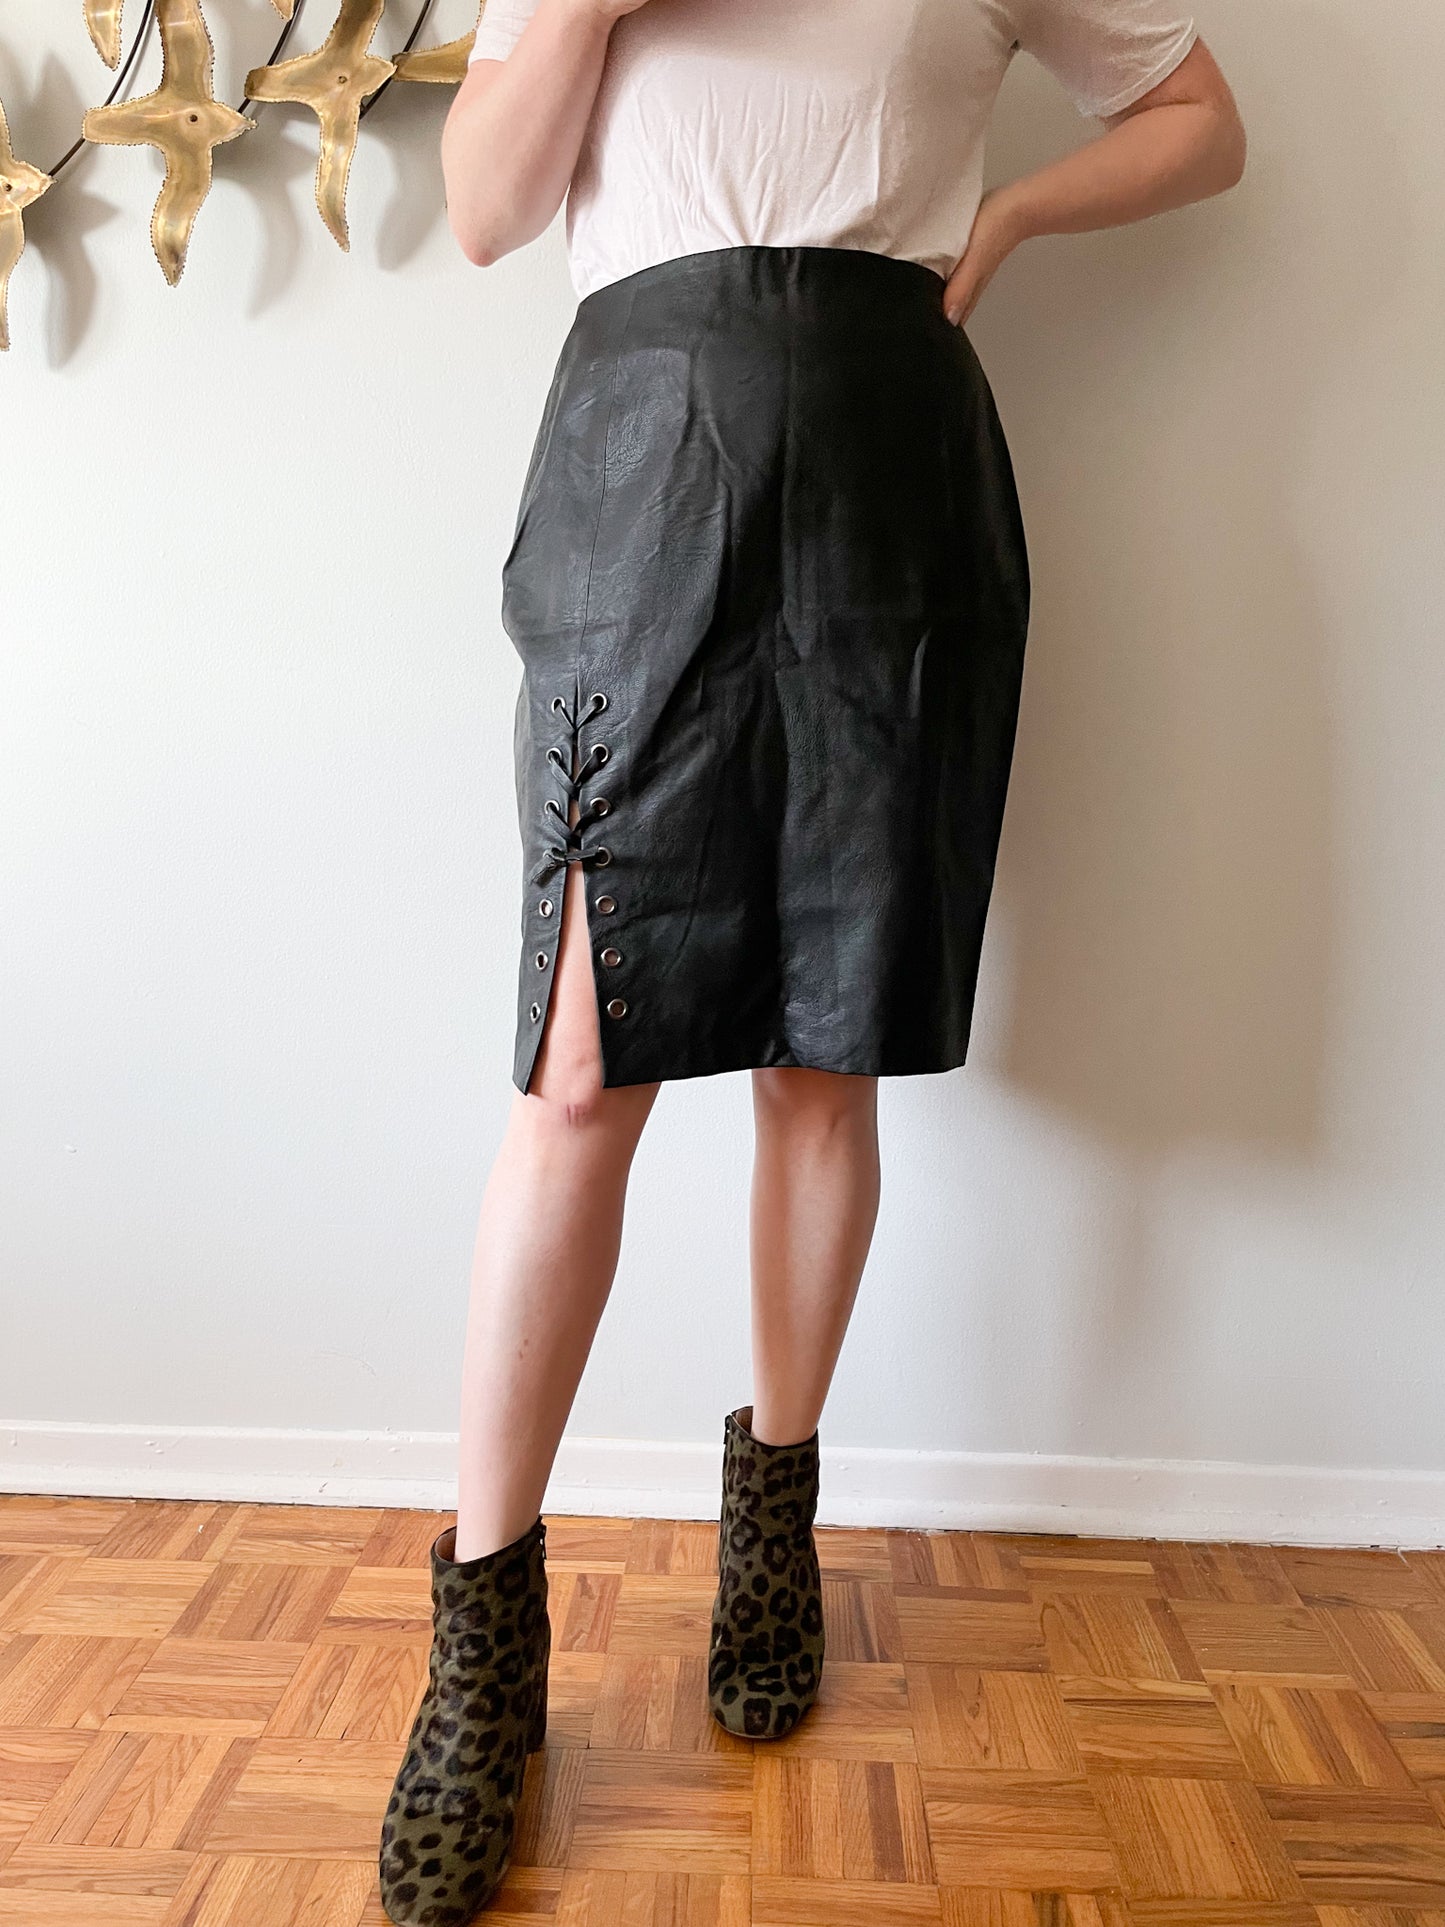 MinkPink Black Knight Lace Up Faux Leather Skirt - M/L